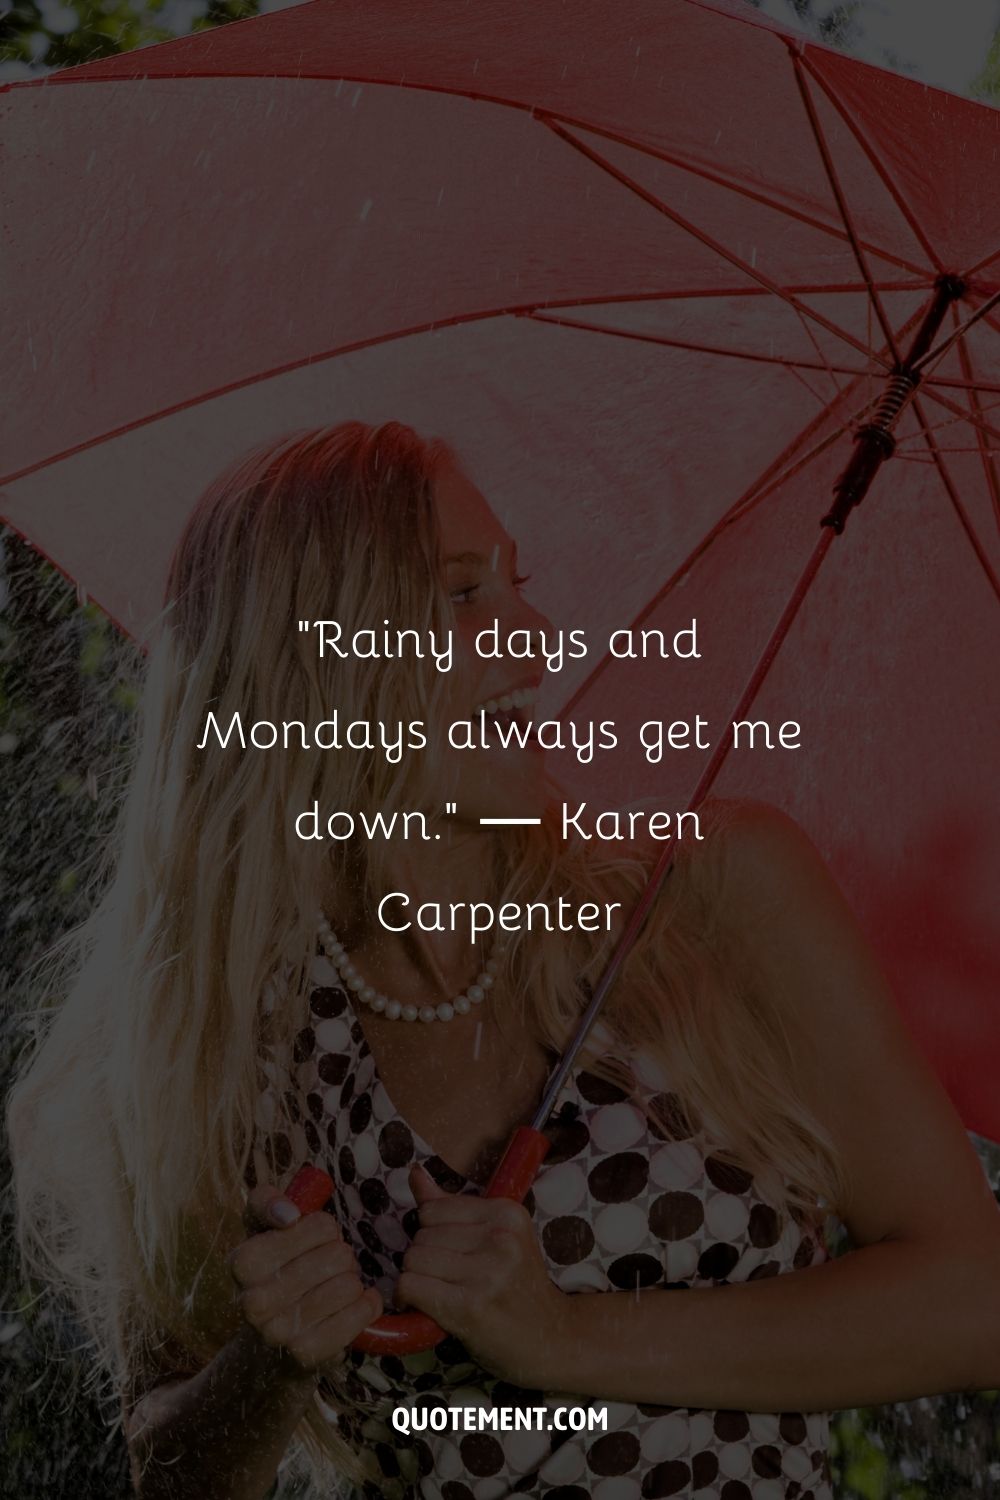 A young woman with long blonde hair standing under a red umbrella amidst falling rain
